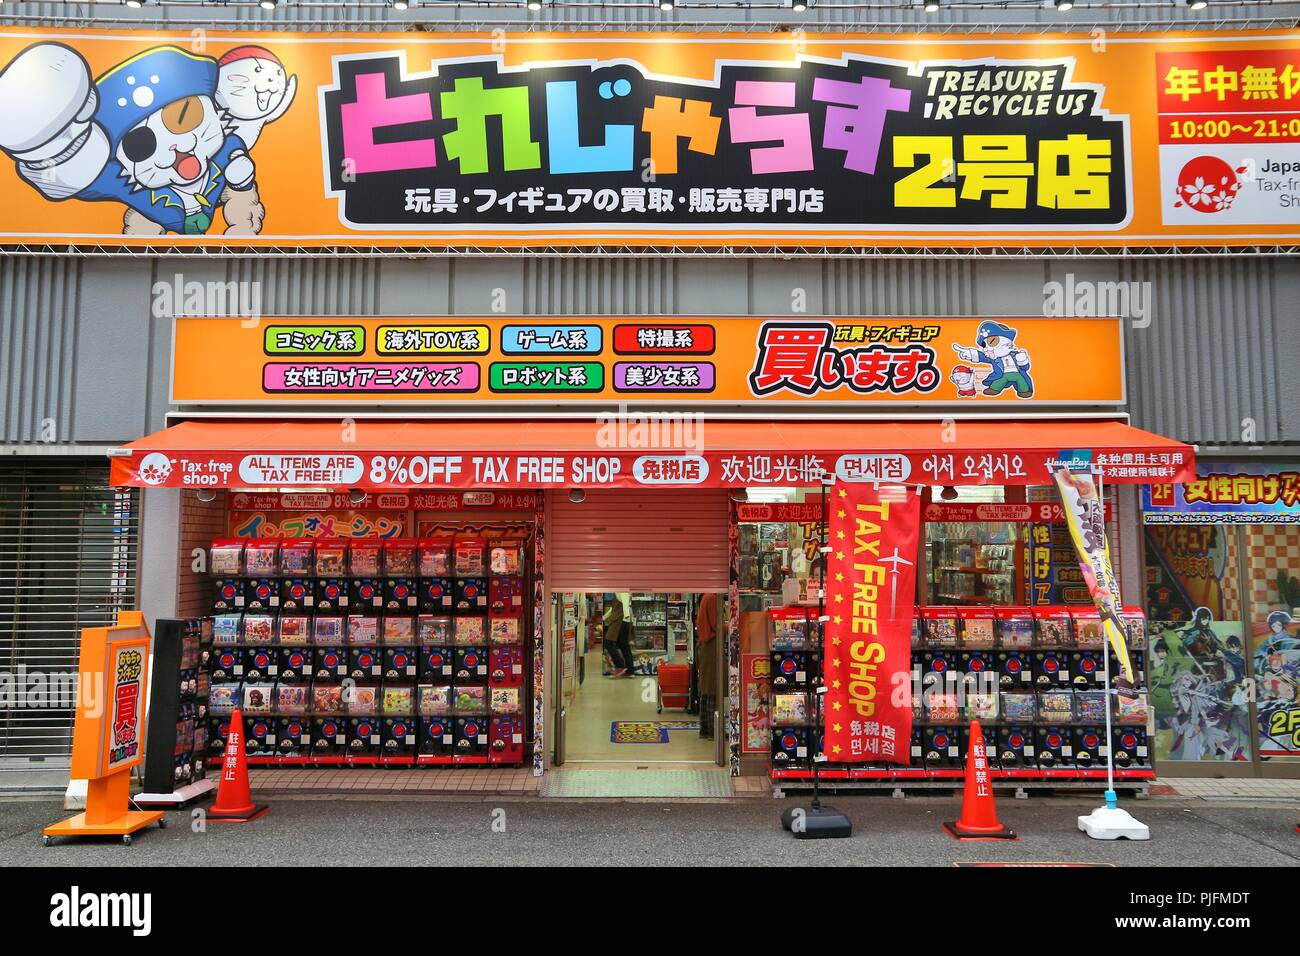 Osaka Japan November 23 16 Toy Store With Capsule Vending Machines In Osaka Japan Is Famous For Its Multitude Of Unusual Vending Machines The Stock Photo Alamy